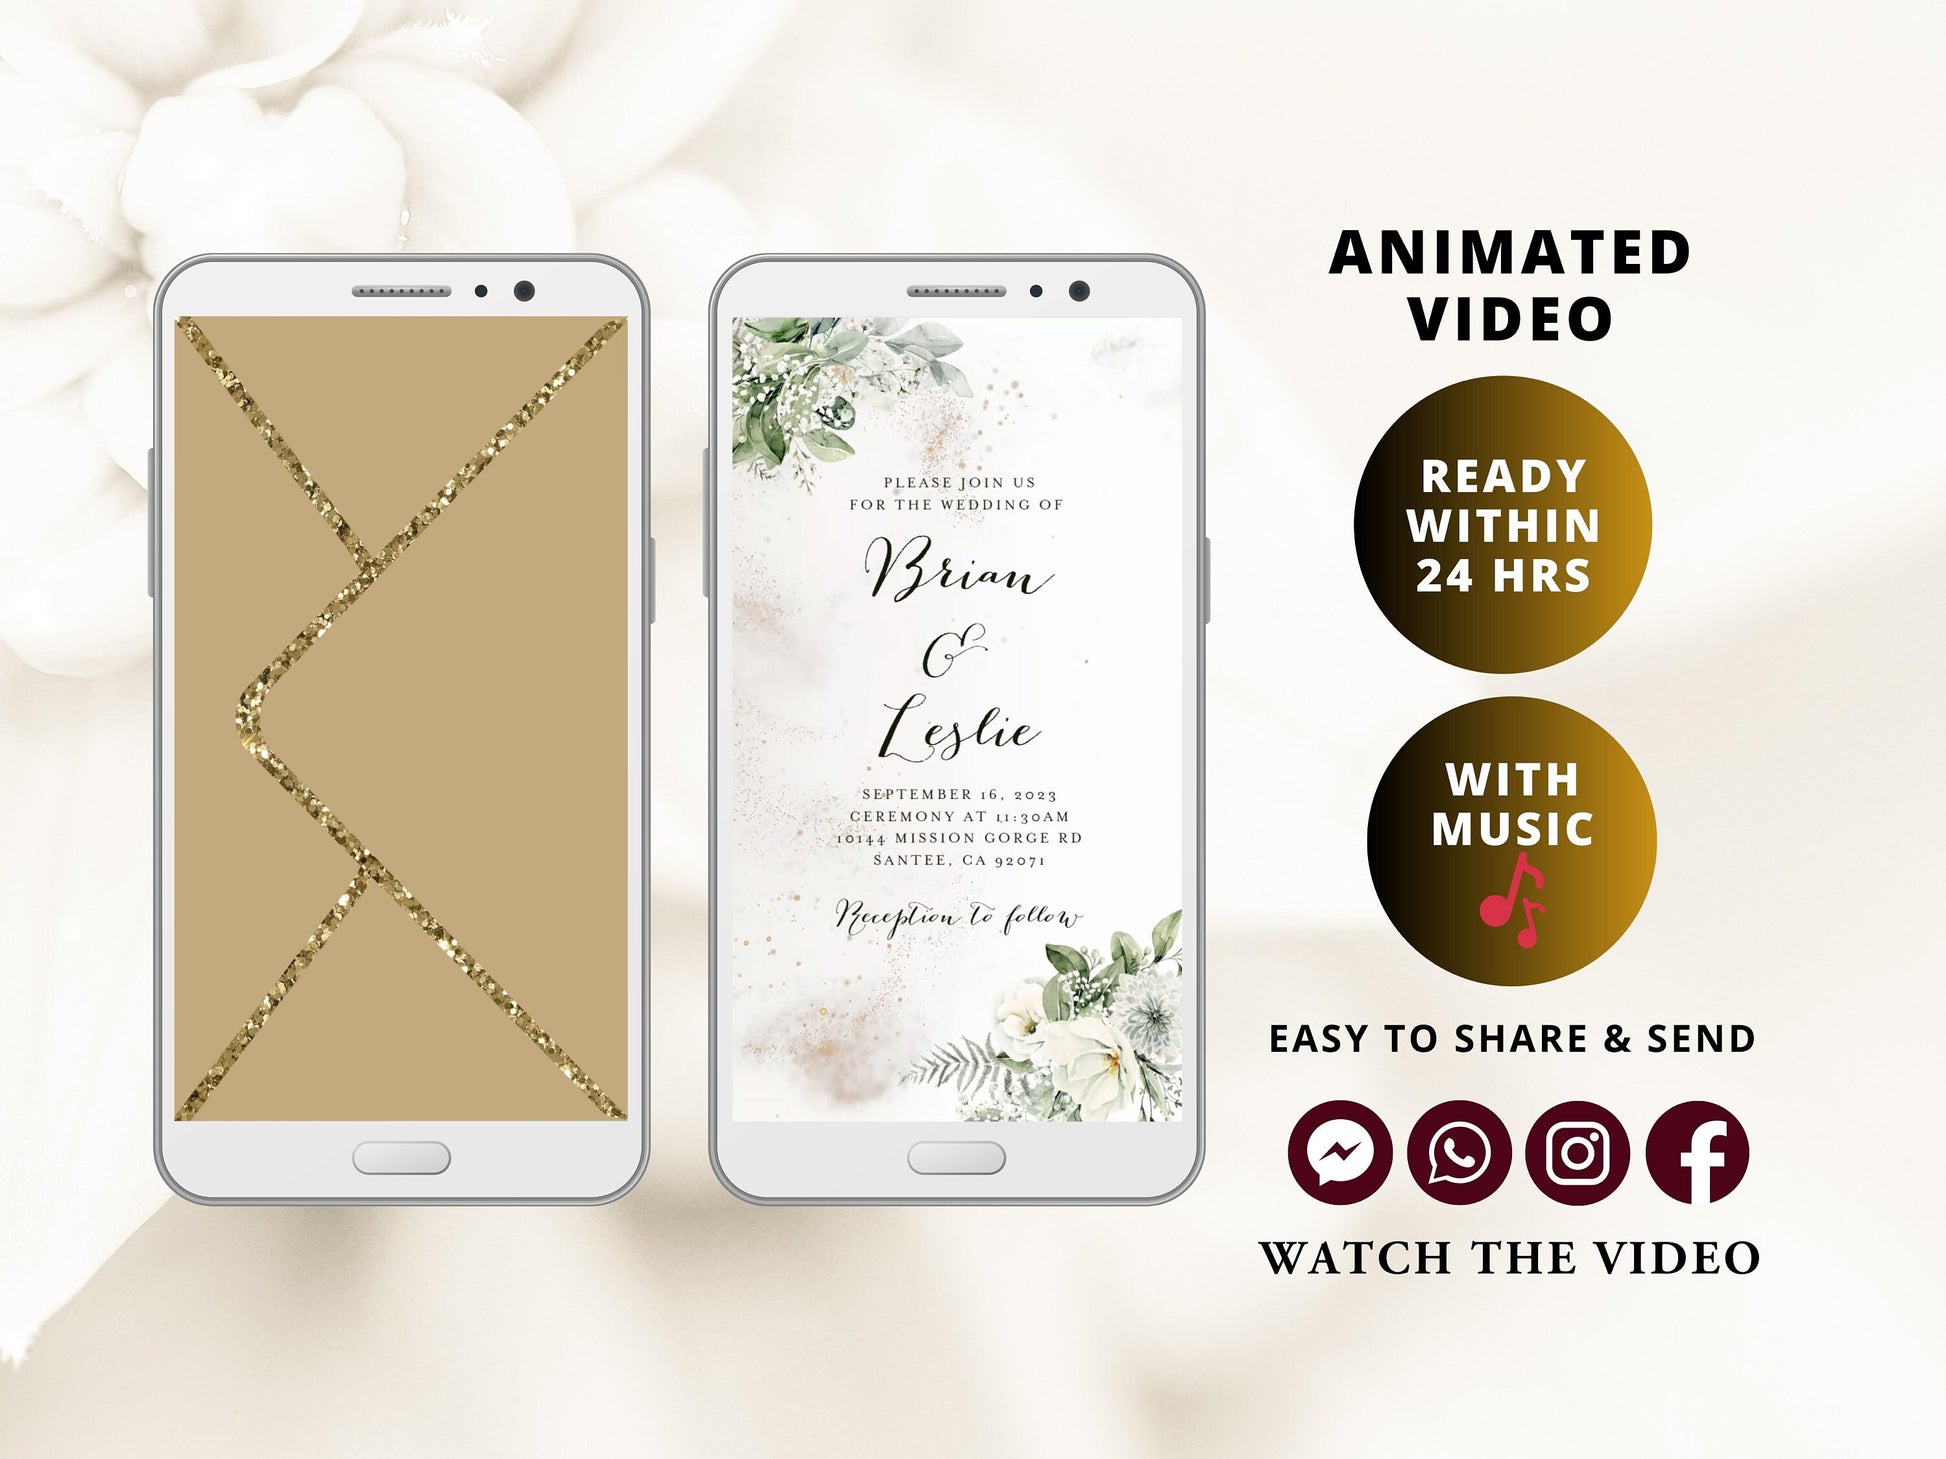 Digital Wedding Invitation with glitter dust and white flowers, electronic wedding invite with opening gold envelope